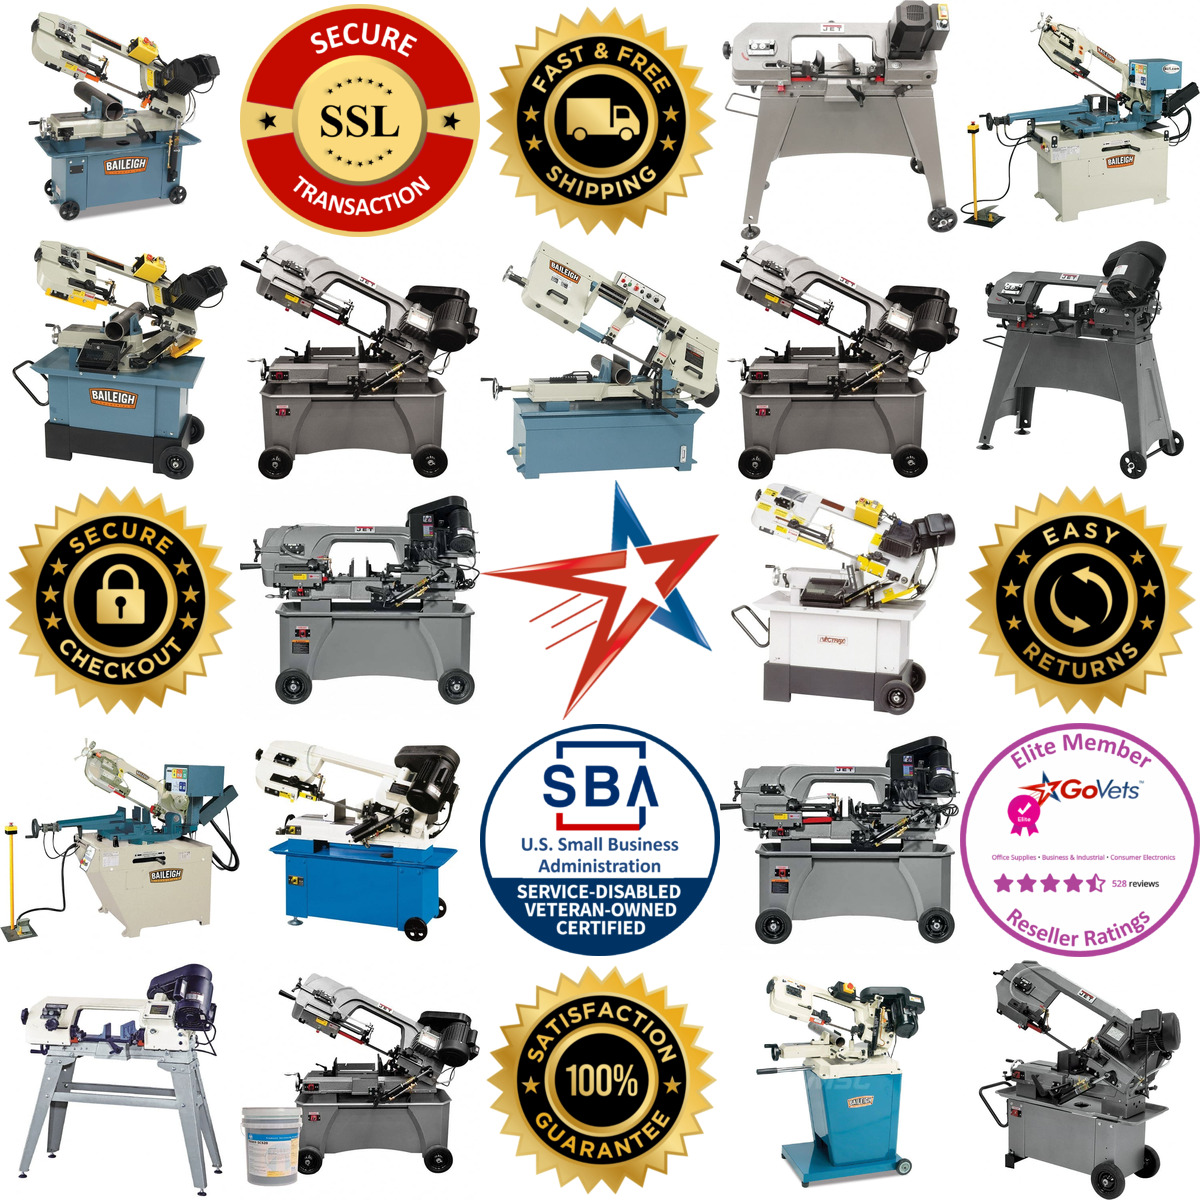 A selection of Combination Horizontal and Vertical Bandsaws products on GoVets